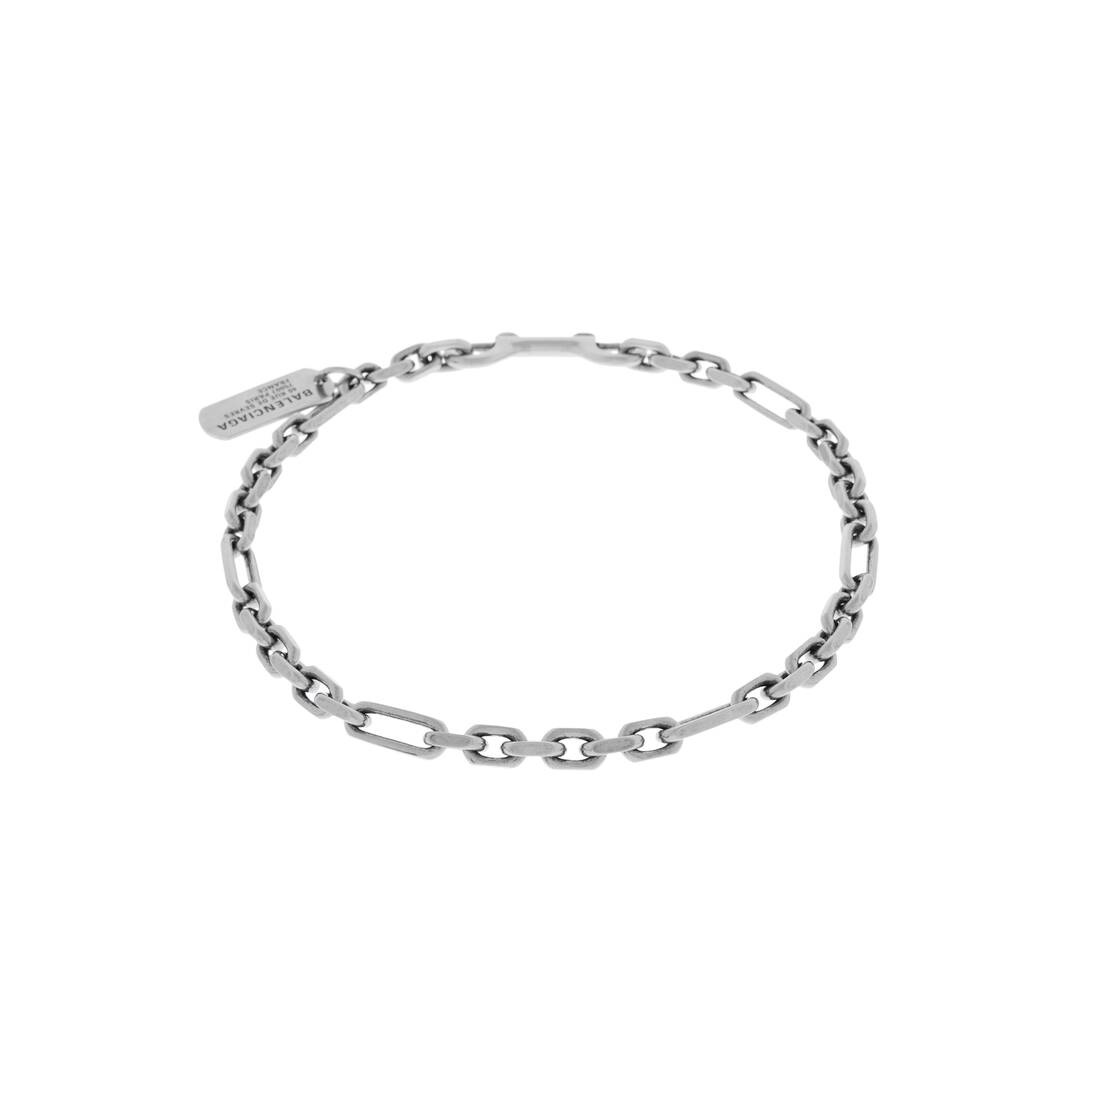 Women's Tags Carabiner Necklace  in Antique Silver - 1